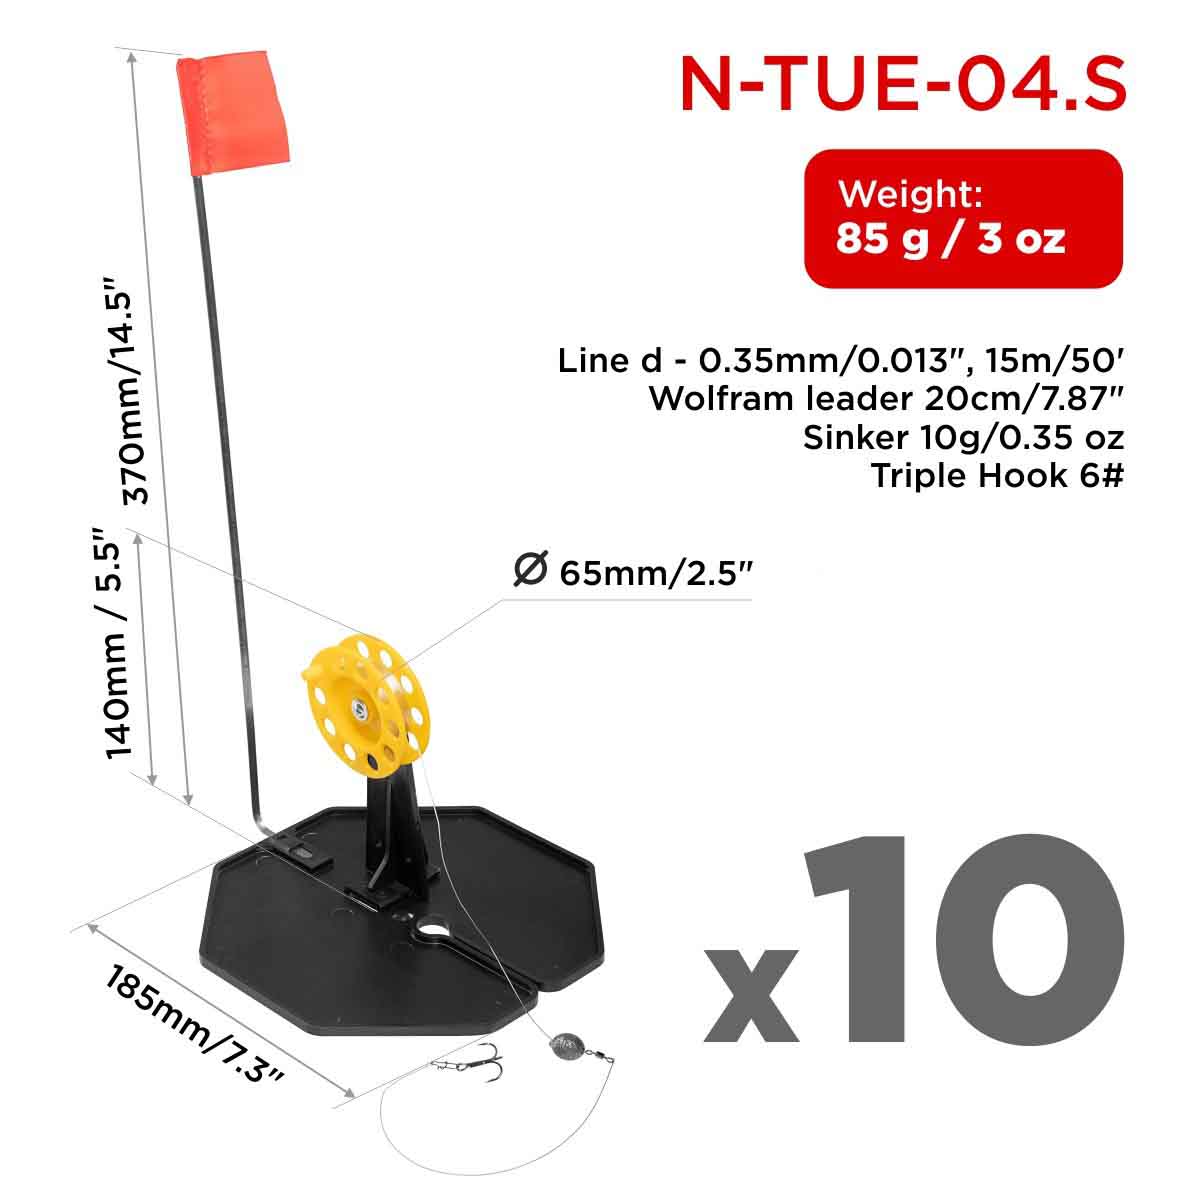 Set of 10 Equipped Tip-up Pop-Up Integrated Hole-Cover Easy to Clip N-TUE-04.S weighs 3 oz, the base is 7.3 inches long, the flag shaft is 14.5 inches, the spool diameter is 2.5 inches and its height is 5.5 inches. Each equipped with a 50 ft of 0.35mm fishing line, a 7.87 inches wolfram leader, a 0.35 oz sinker and a triple hook